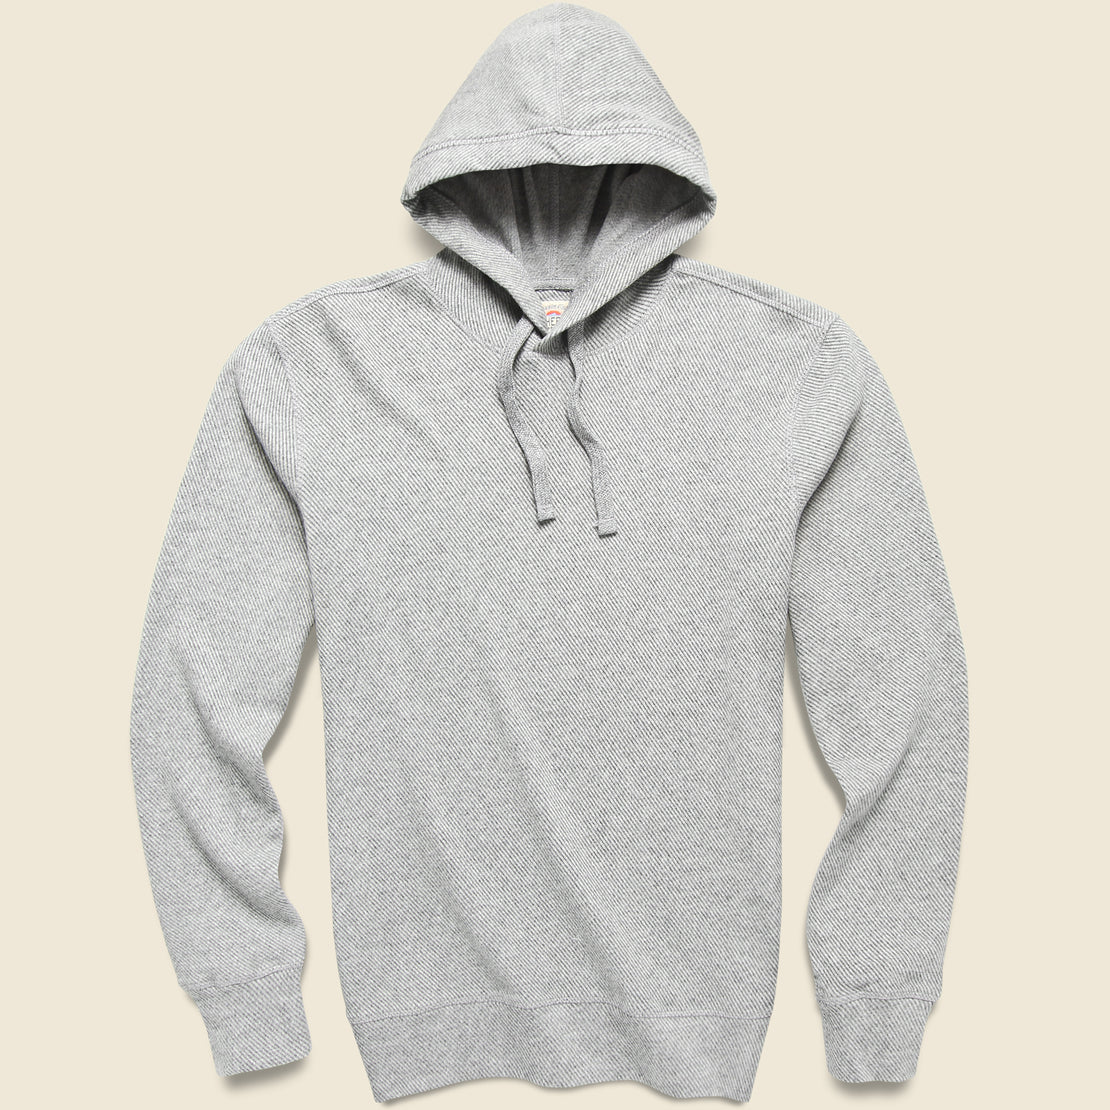 Legend Sweater Hoodie - Fossil Grey Twill - Faherty - STAG Provisions - Tops - Fleece / Sweatshirt